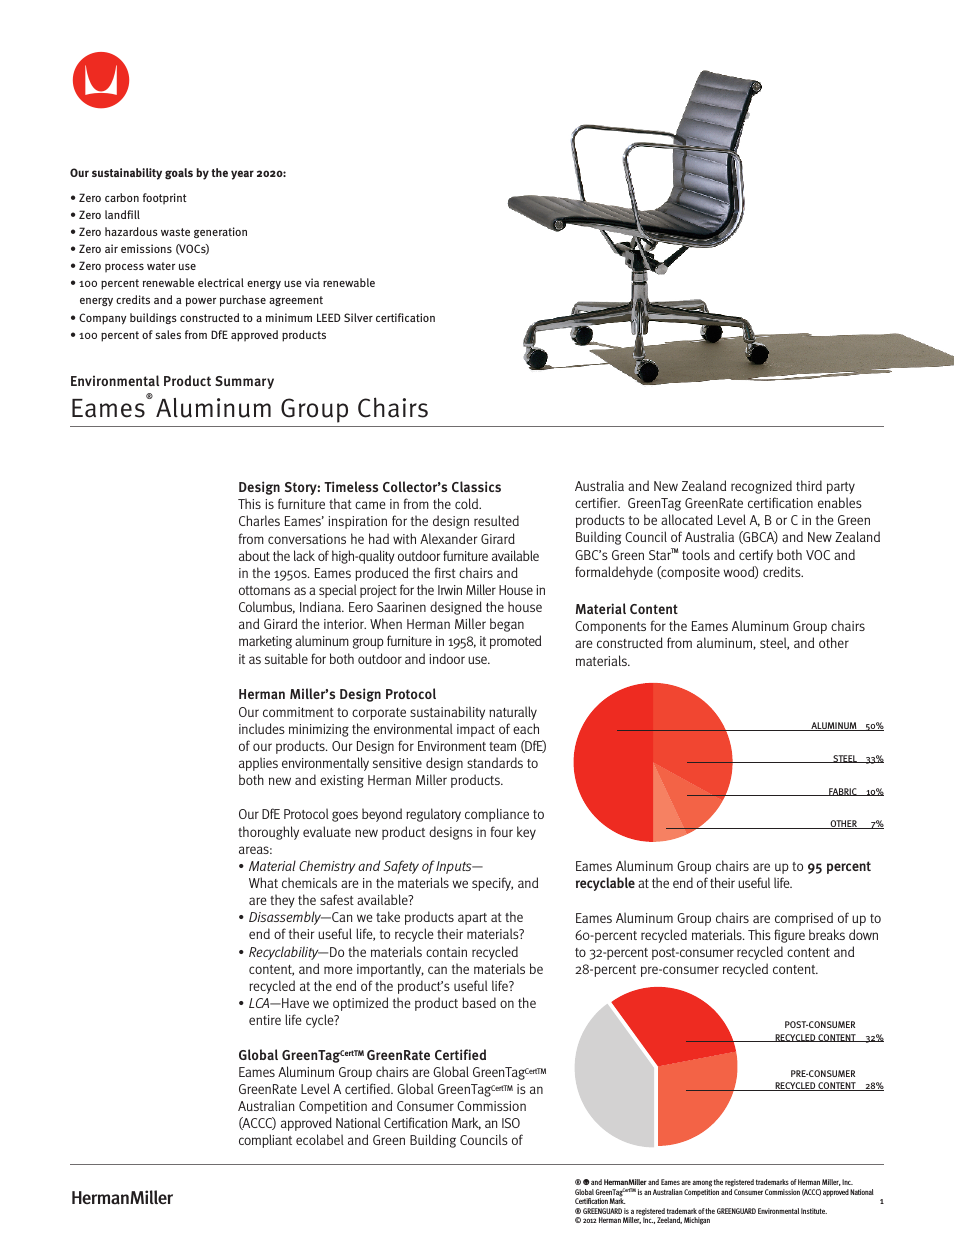 Eames Aluminum Group Chairs - Environmental Product Summary